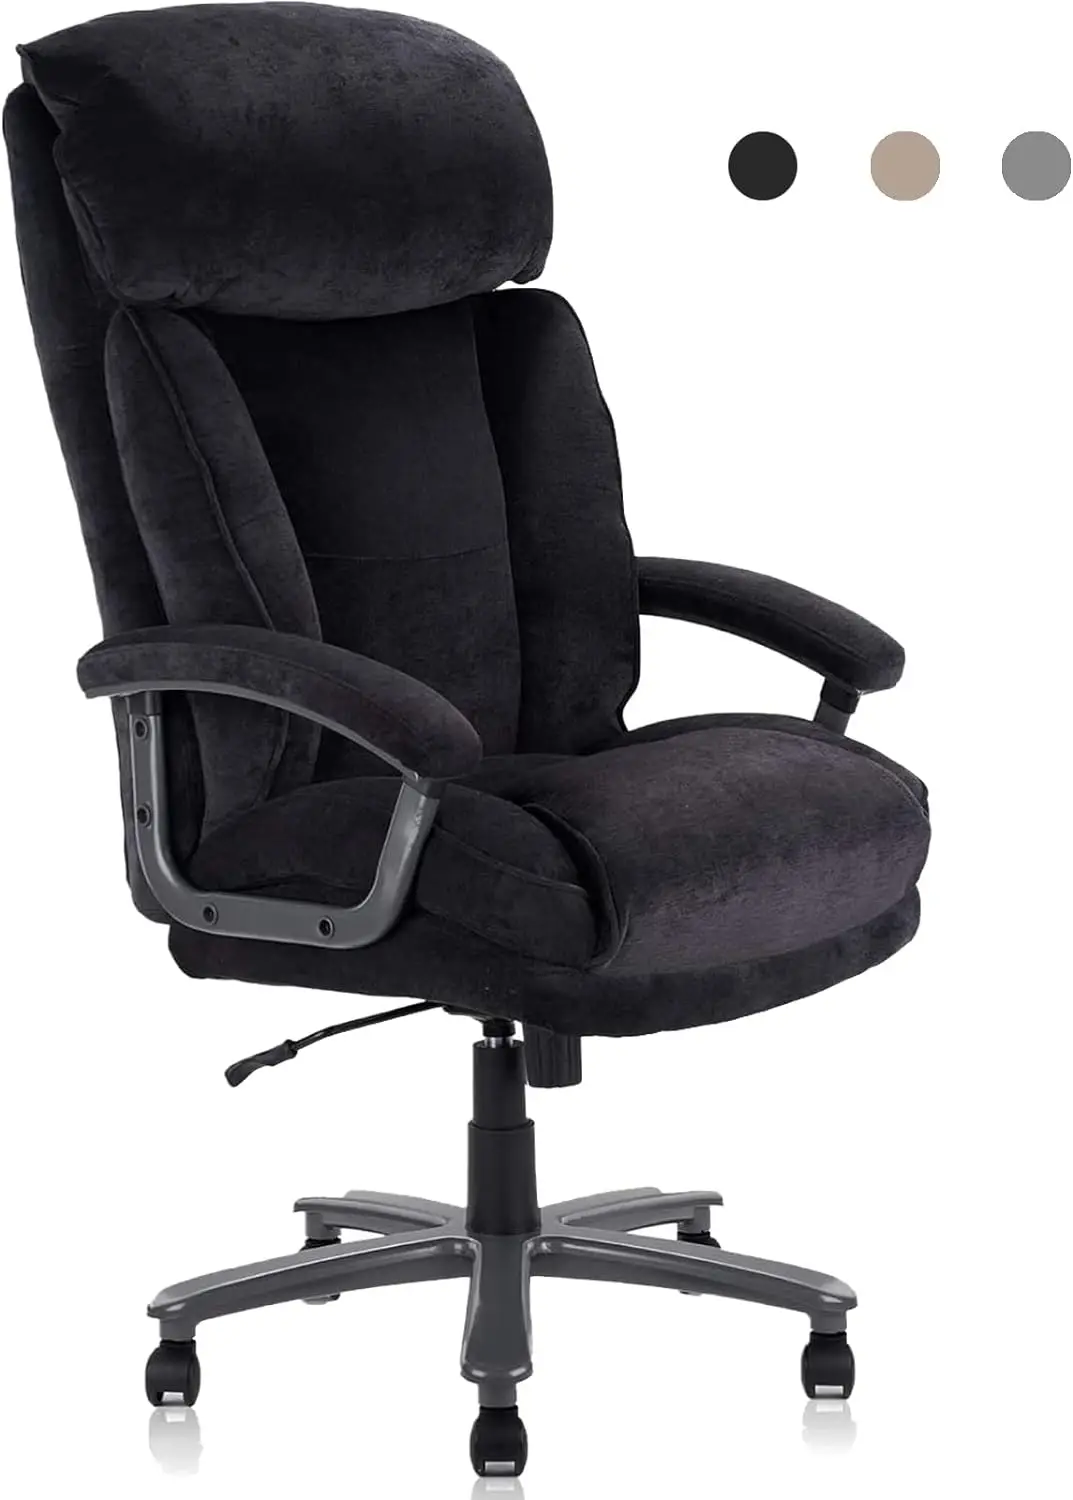 

CLATINA Ergonomic Big and Tall Executive Office Chair with Upholstered Swivel 400lbs High Capacity Adjustable Height Thick